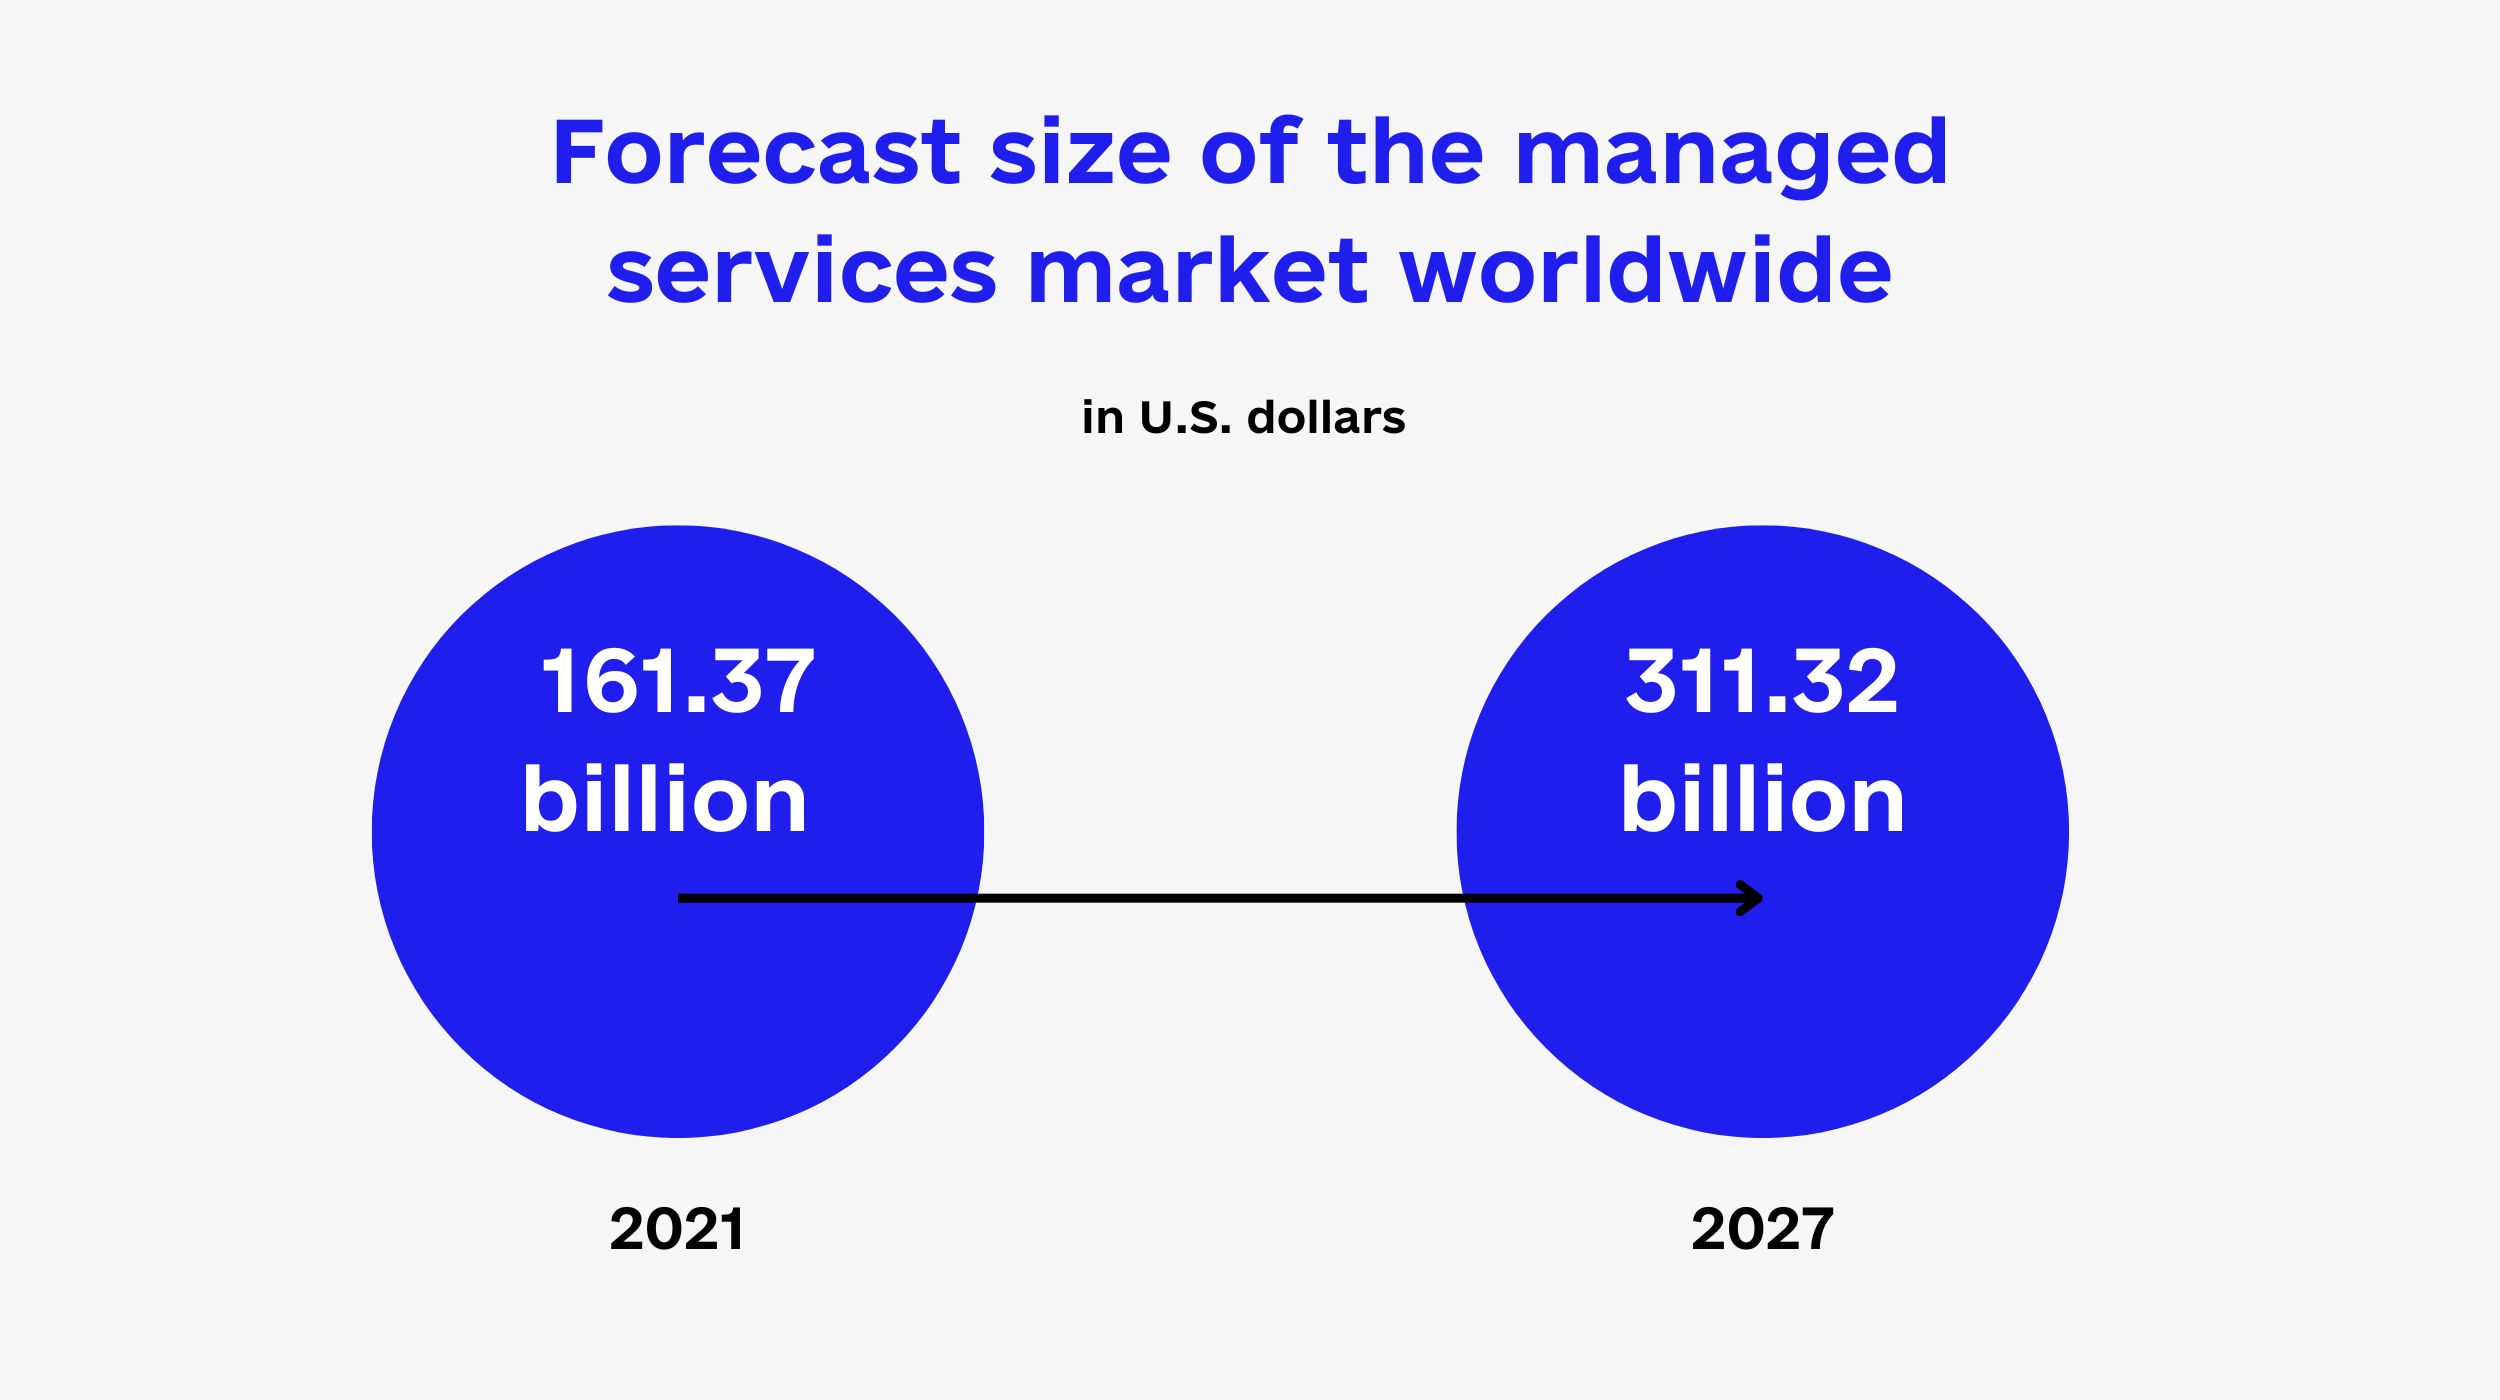 Forecast size of the managed services market worldwide